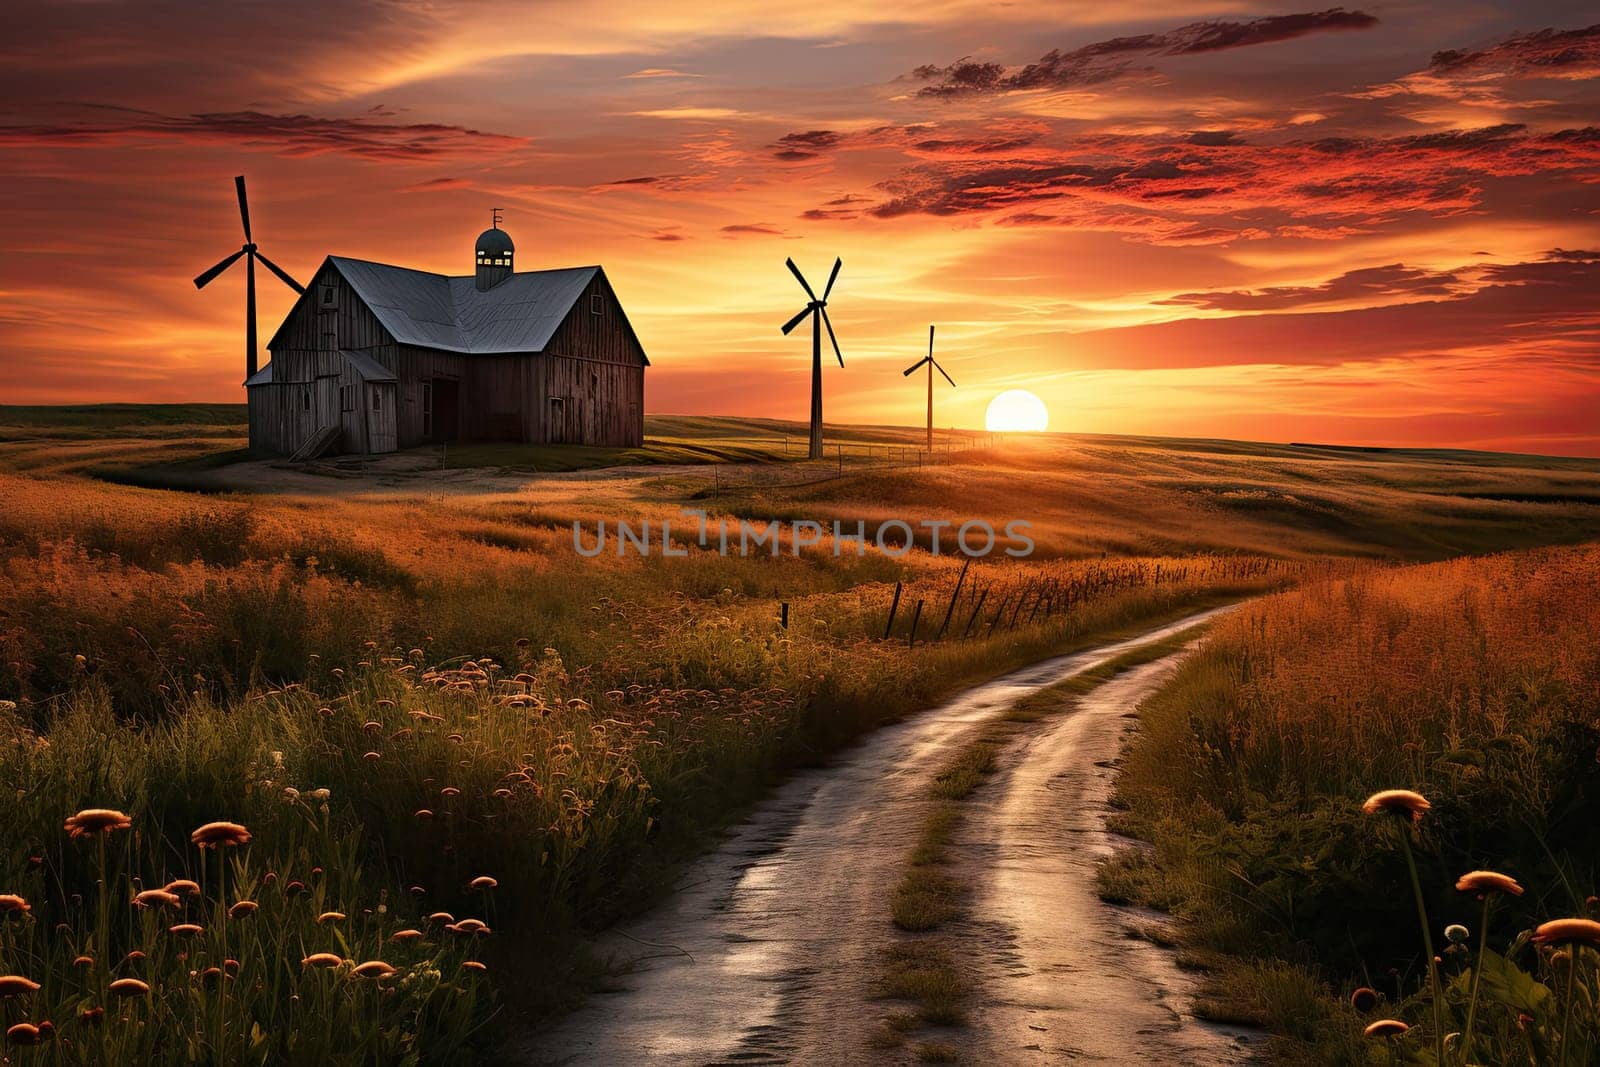 A Serene Landscape: Captivating Farm with Majestic Windmills in the Distance